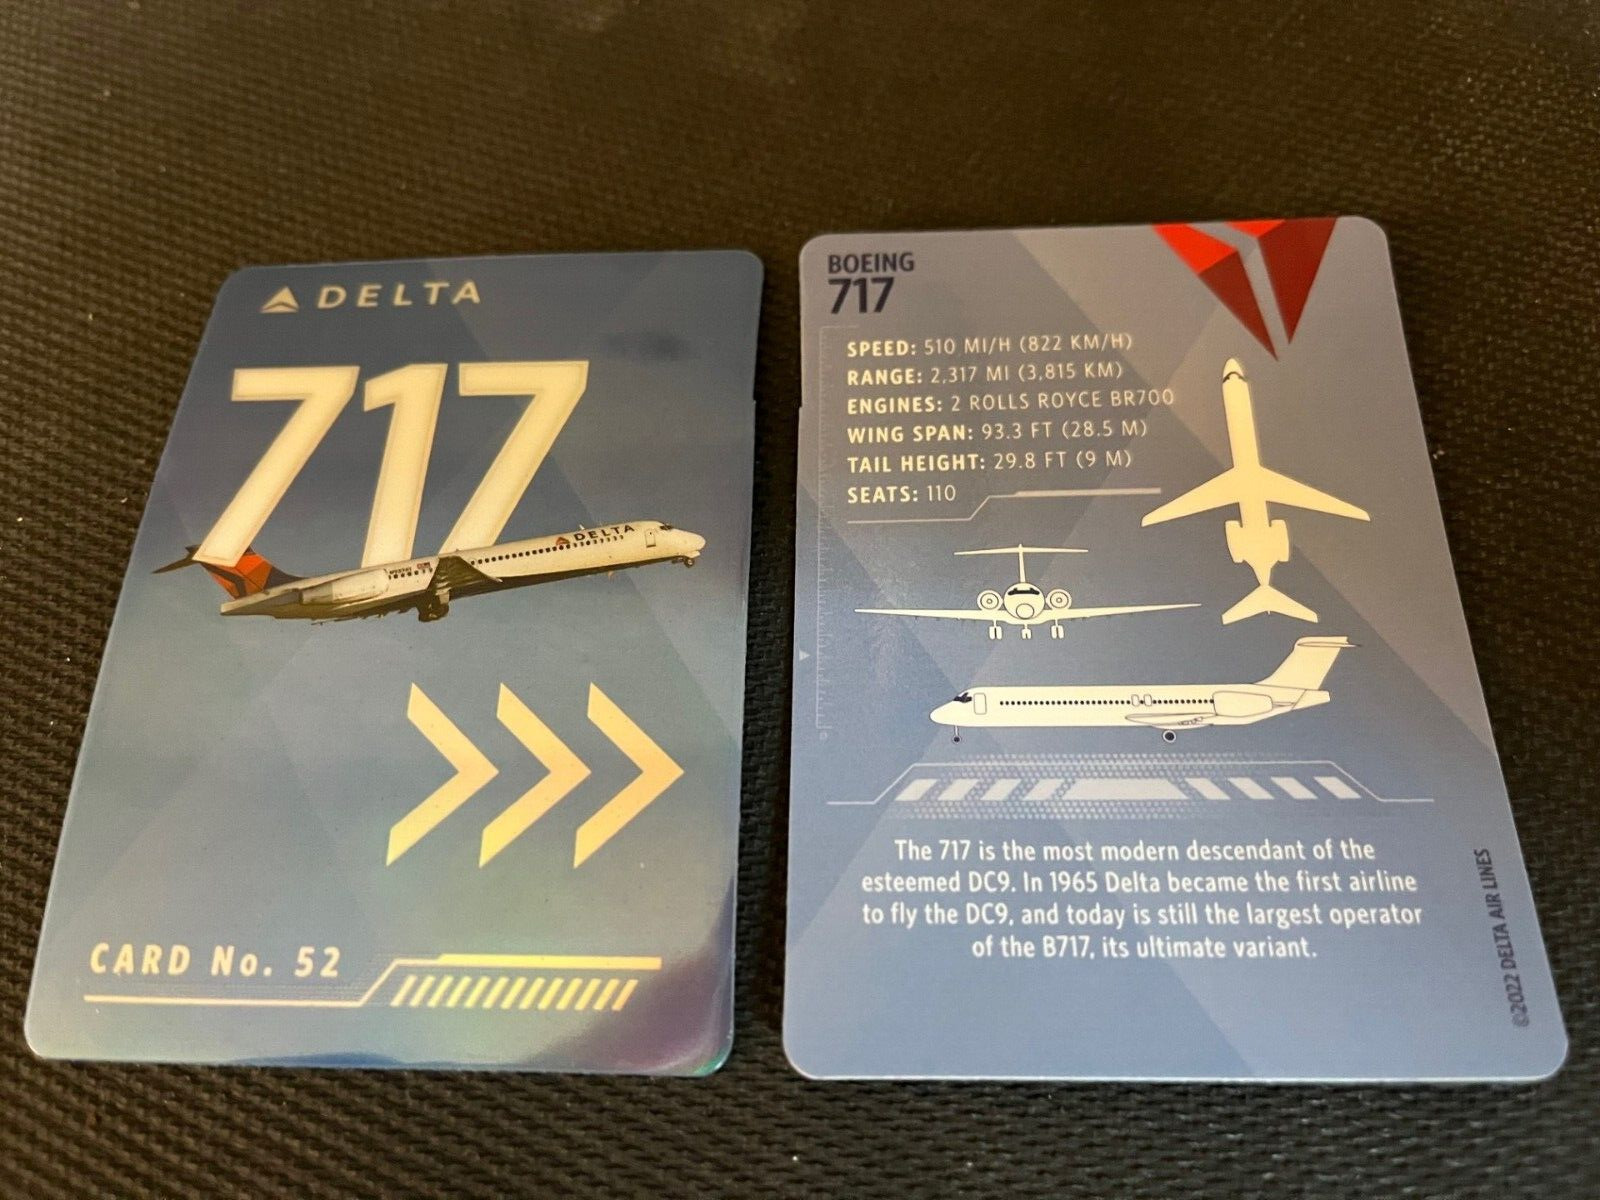 Delta Airlines Boeing 717 Trading Card Number 52 (Free Shipping)